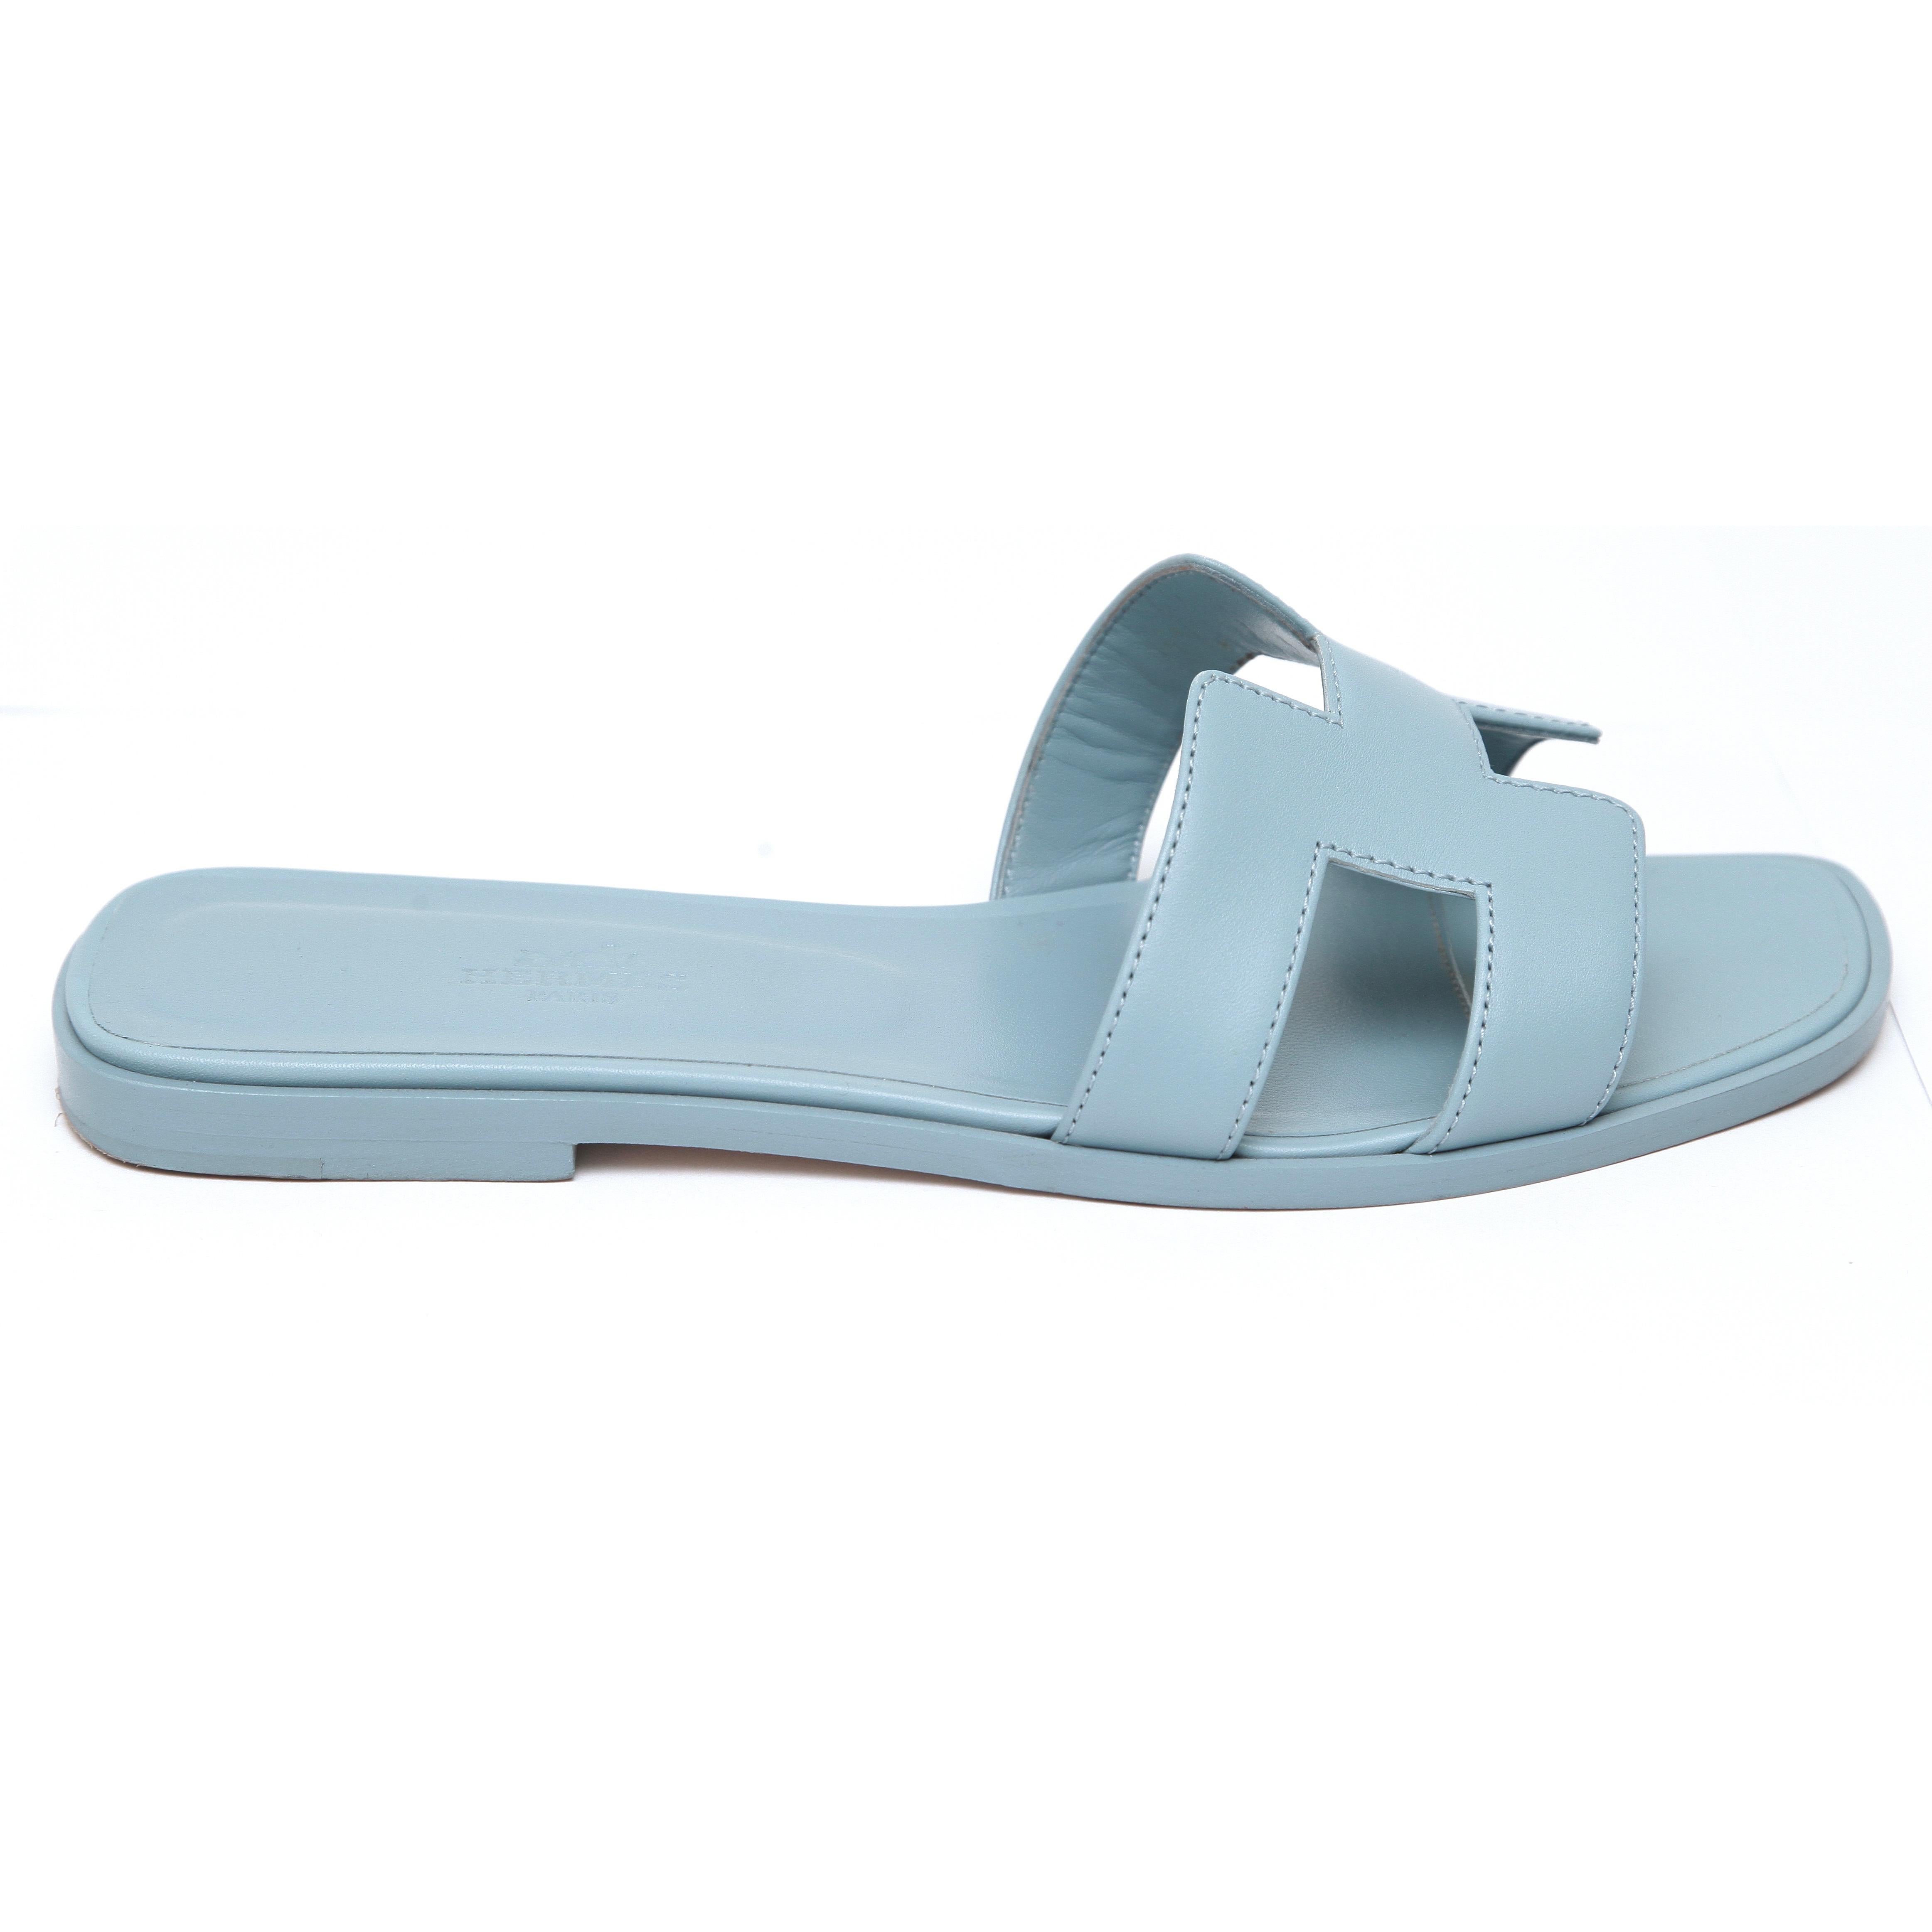 GUARANTEED AUTHENTIC HERMES LIGHT BLUE LEATHER ORAN SANDALS


Design:
- Light blue leather uppers.
- Slip on.
- Leather insole and sole.
- Comes with dust bags.

Size: 38

Measurements (Approximate):
- Insole: 9.75